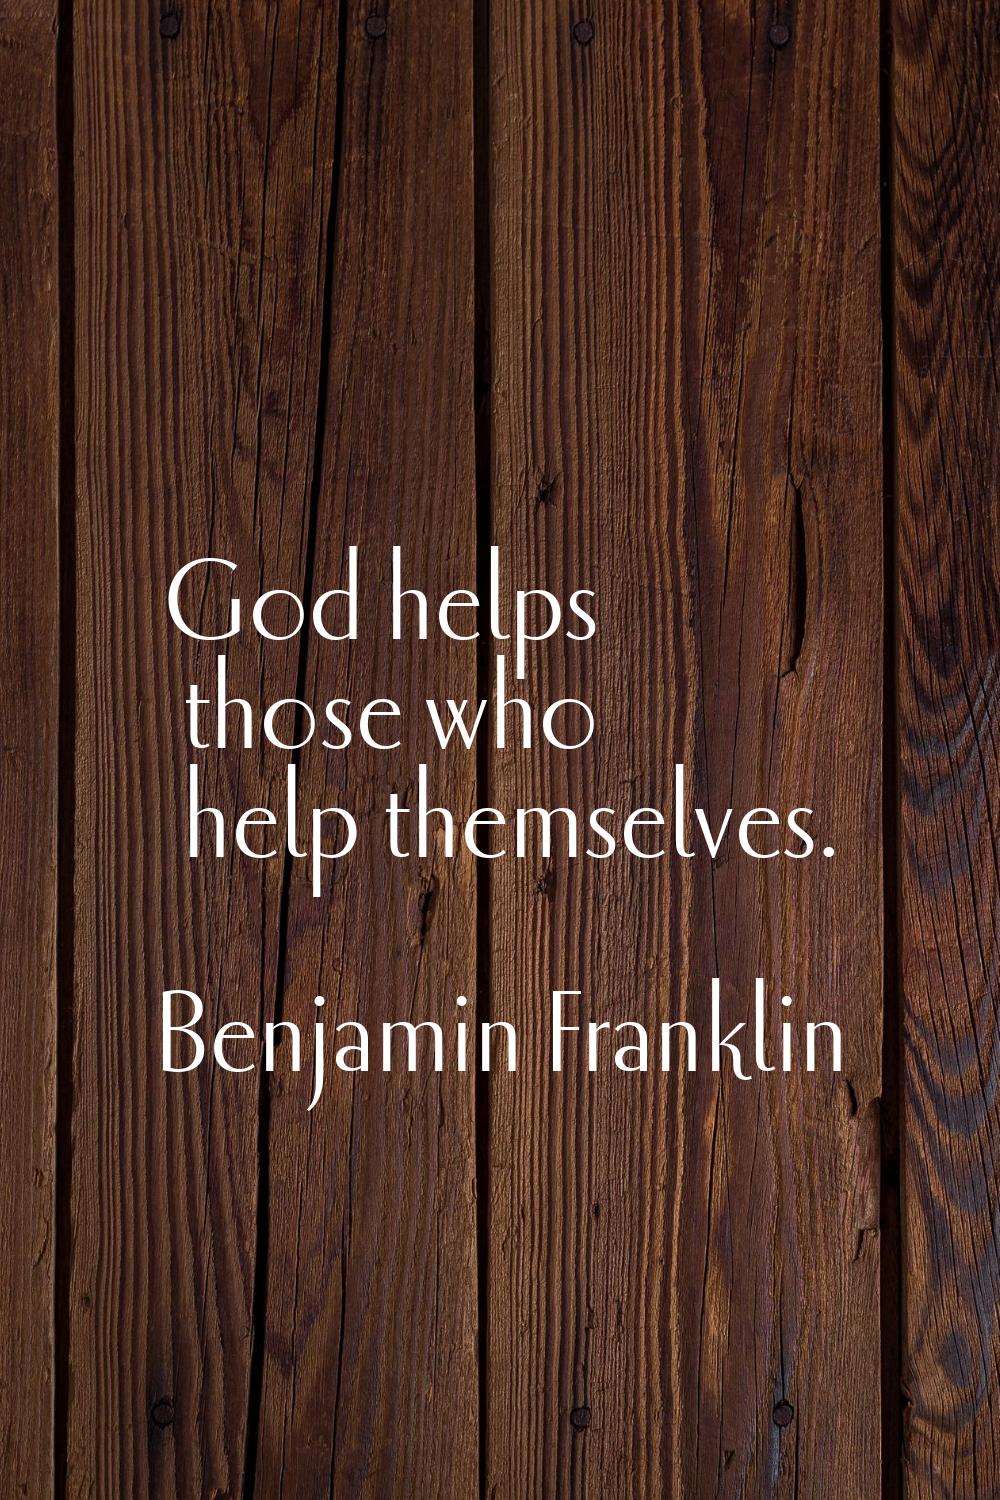 God helps those who help themselves.